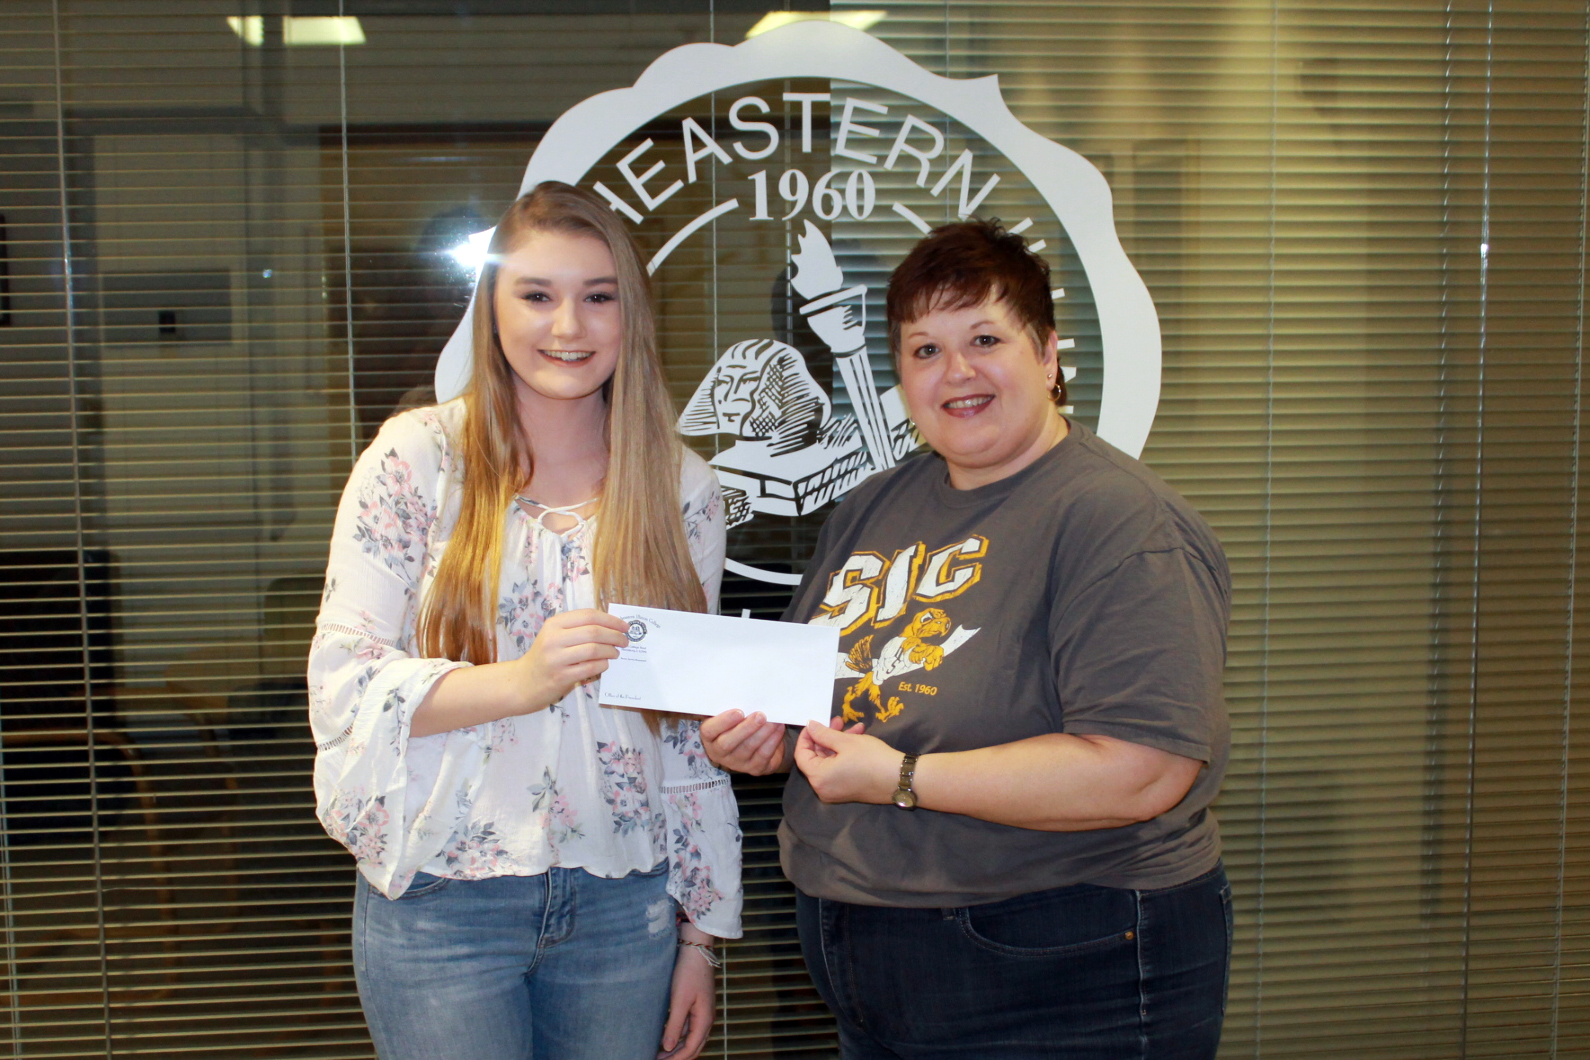 Olivia Matthews of Cave-In-Rock (left) receives a $50 check from Dr. Karen Weiss, SIC Vice President of Academic Affairs, for winning the 2018 Paul Simon Essay Contest at Southeastern Illinois College.